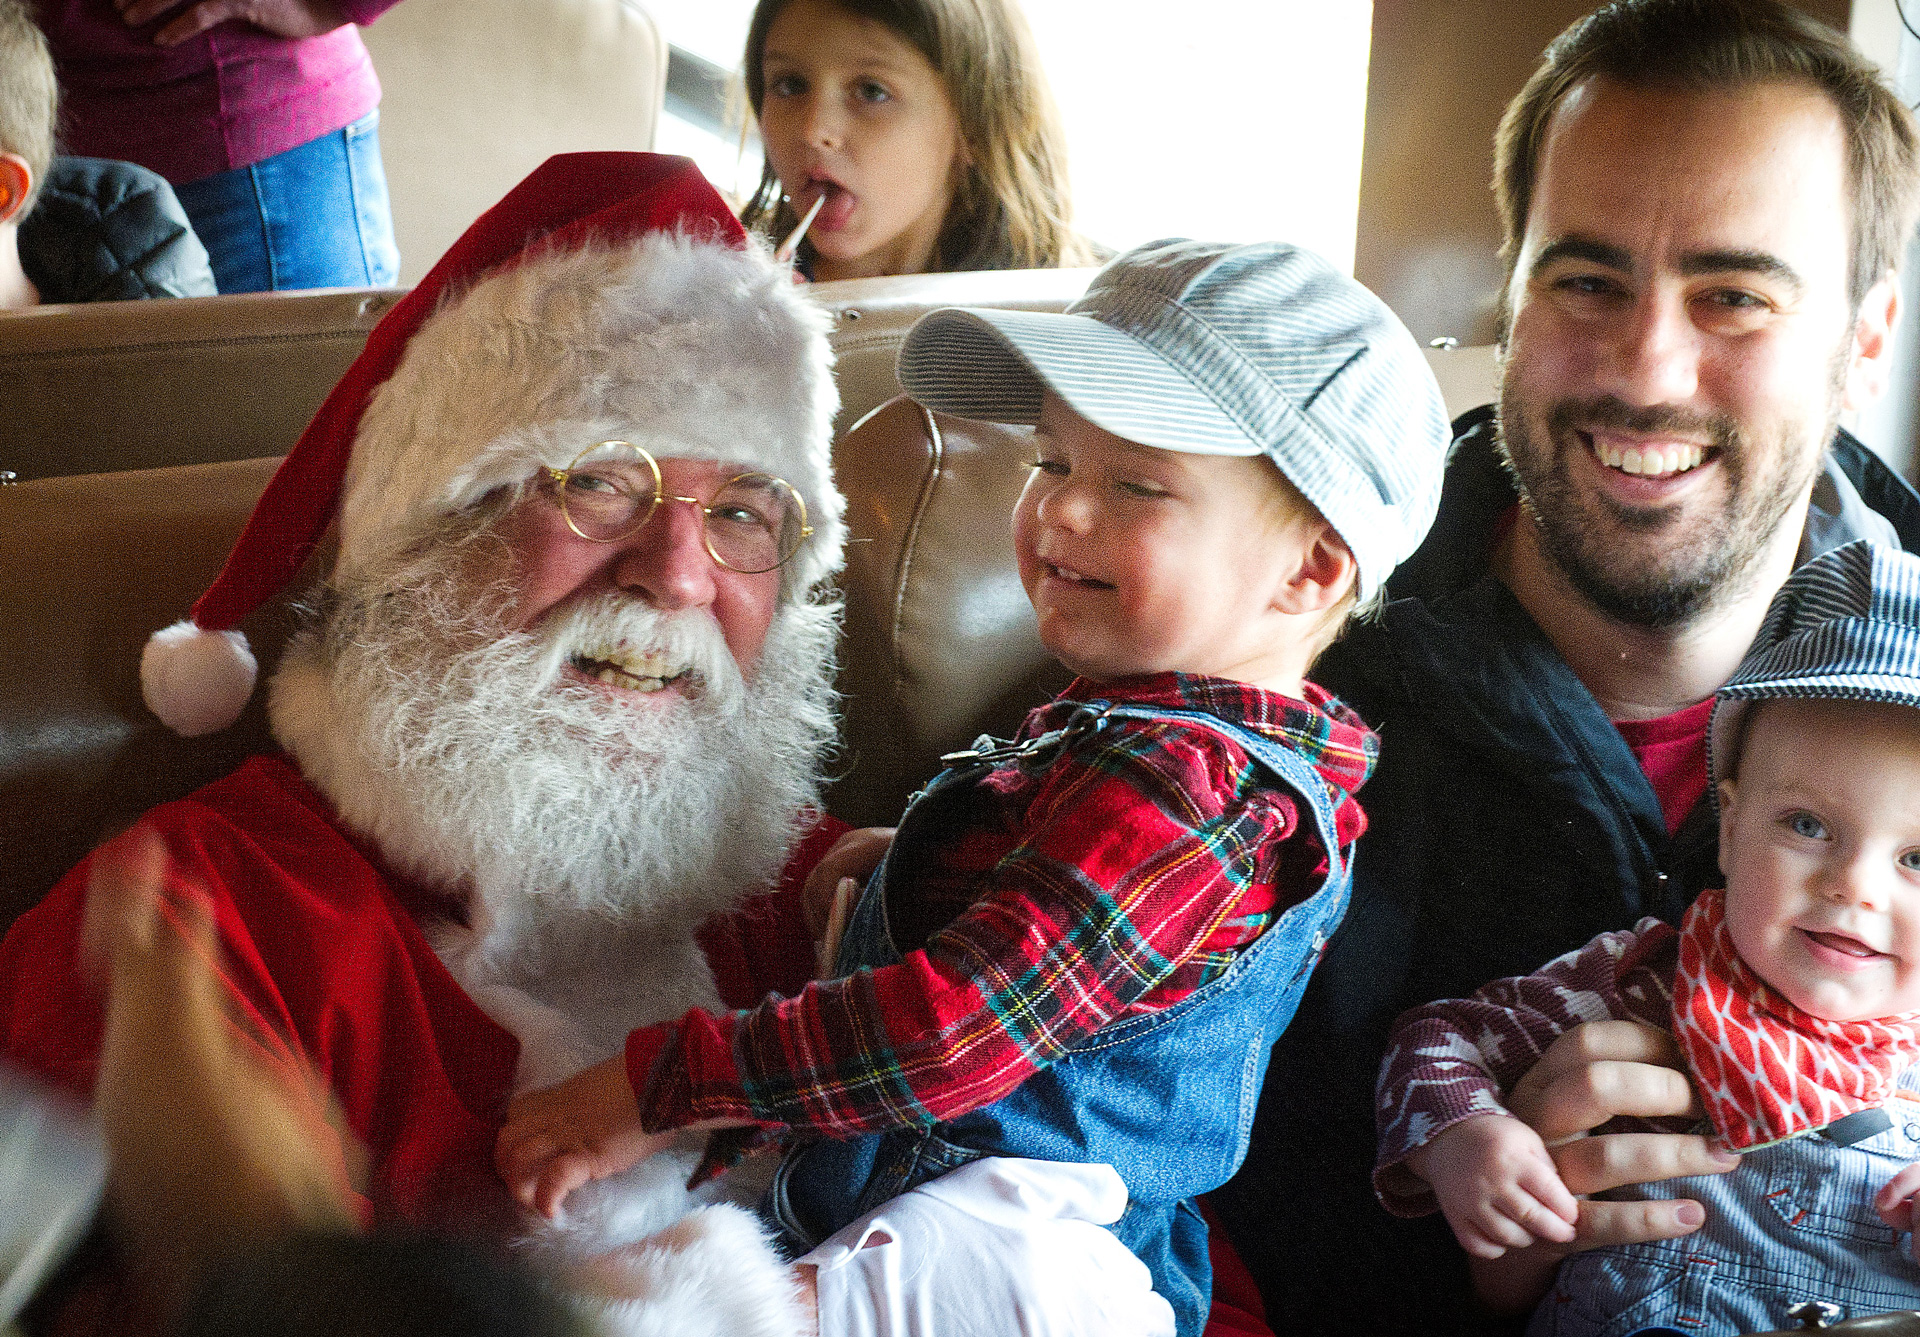 Santa Claus holding a young boy sitting next to a dad holding another young boy on the Holiday Express train